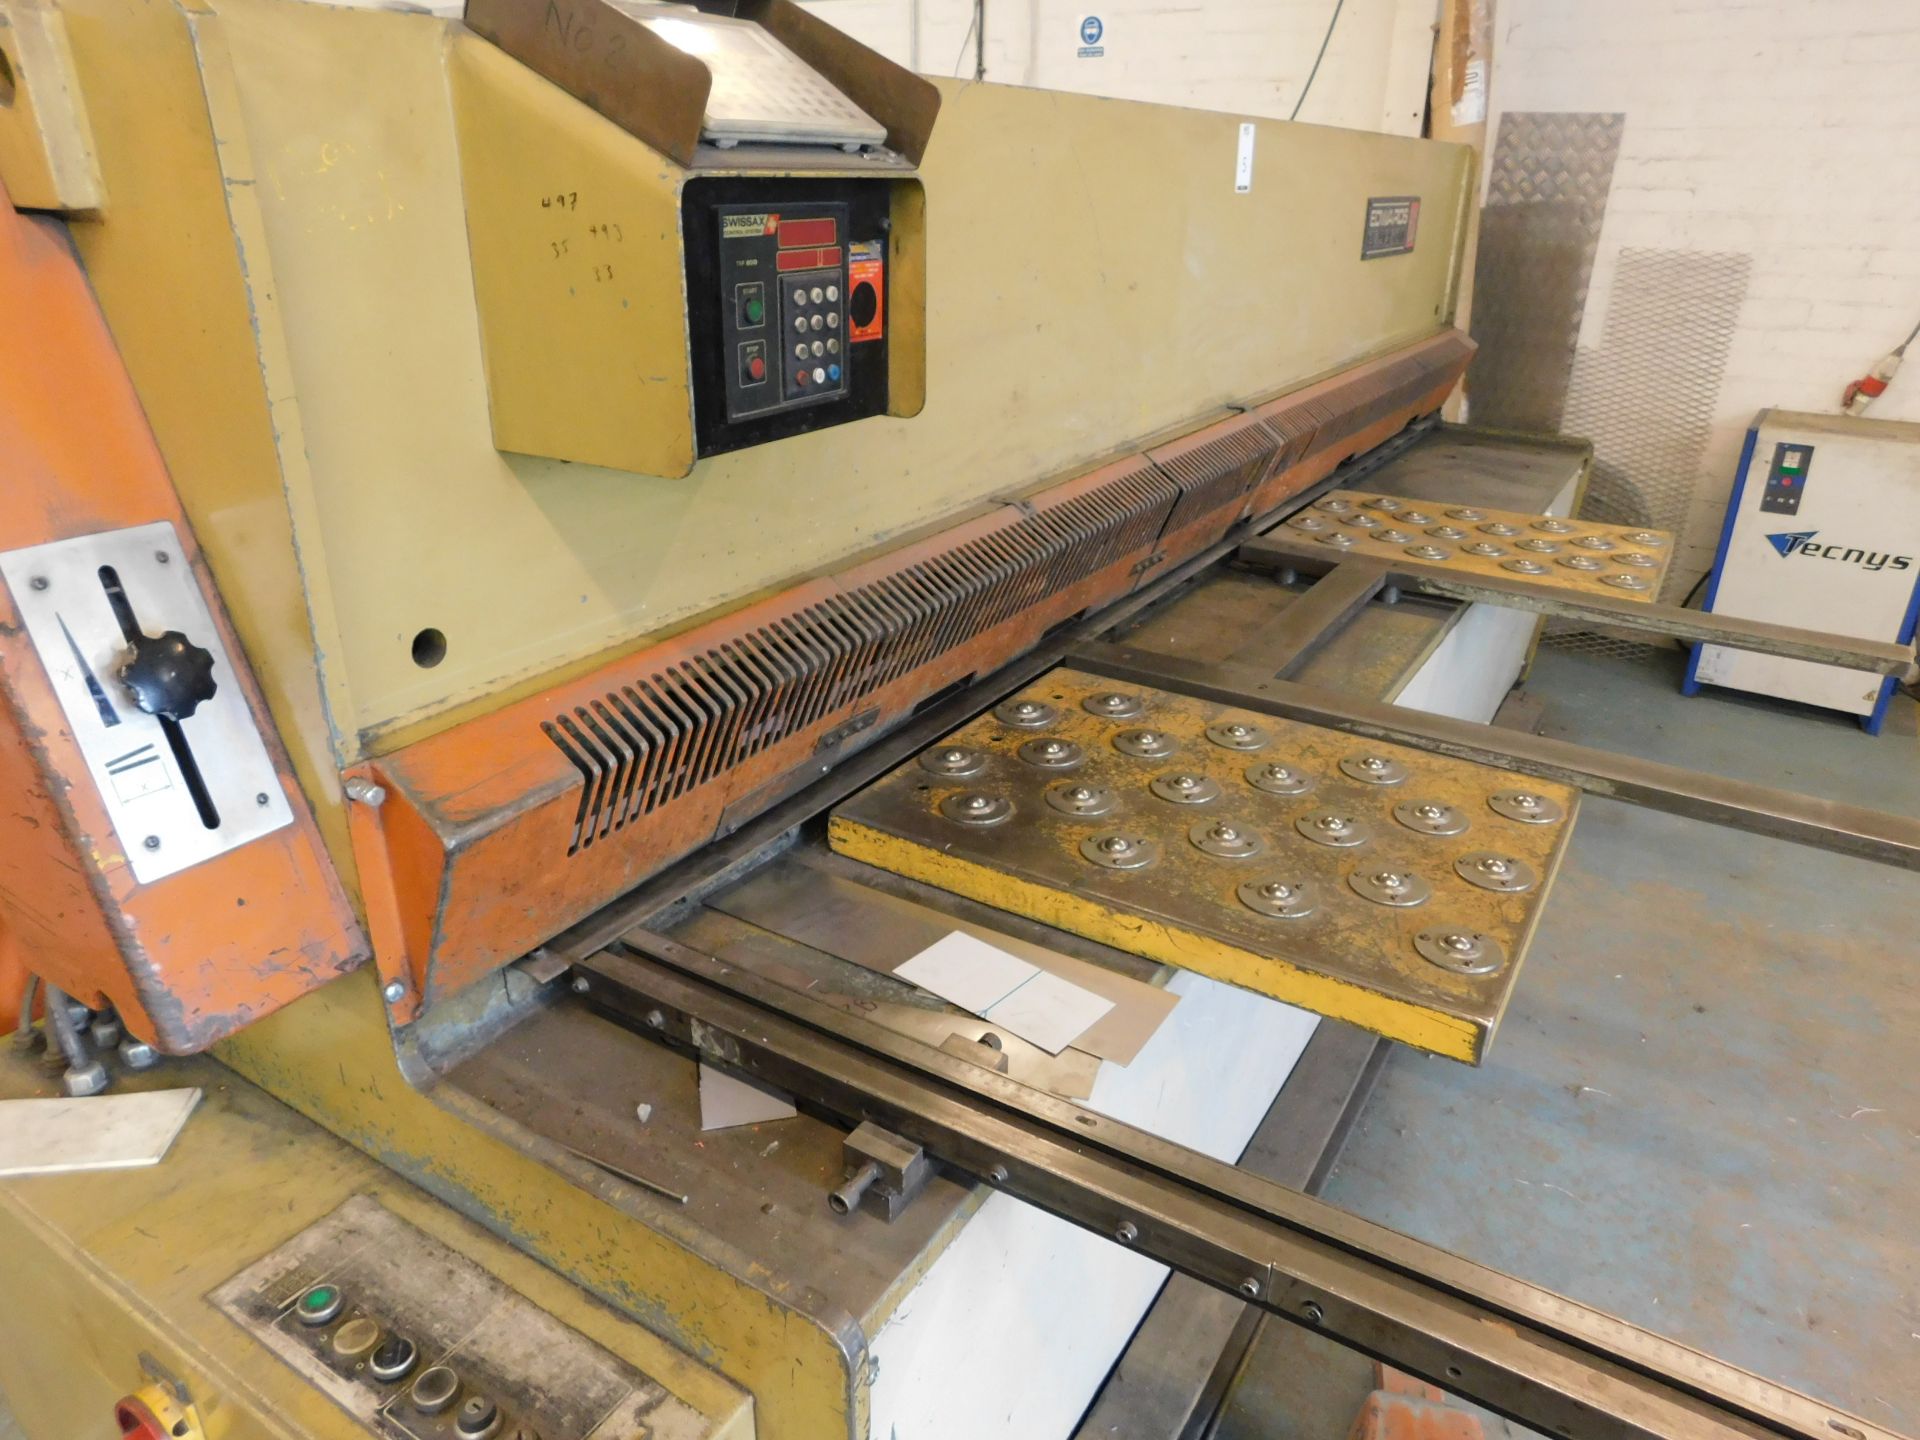 Edwards Pearson Model GM 6.5mm x 3080 Hydraulic Guillotine, Serial Number 90G351 with Swissax DRO ( - Image 3 of 6